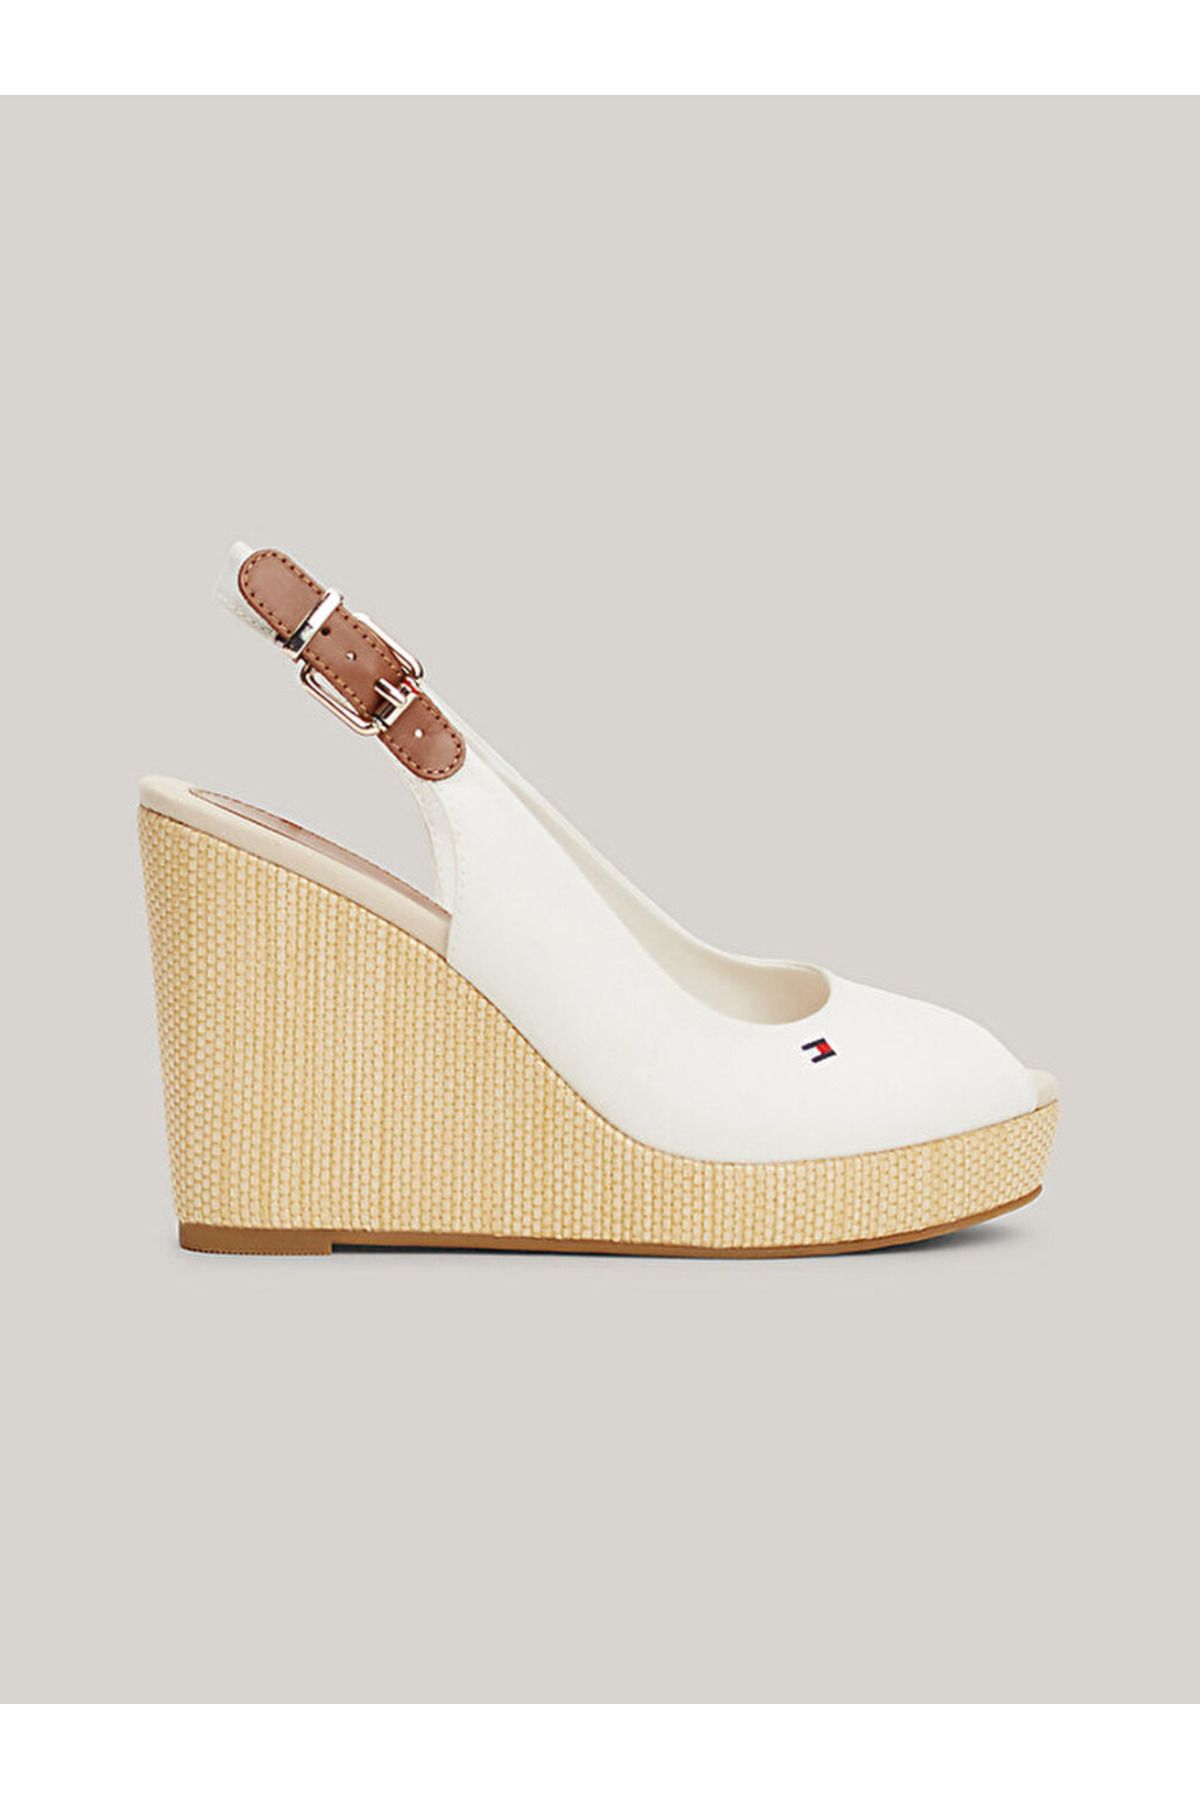 Tommy Hilfiger Iconic Slingback High Wedge Sandals